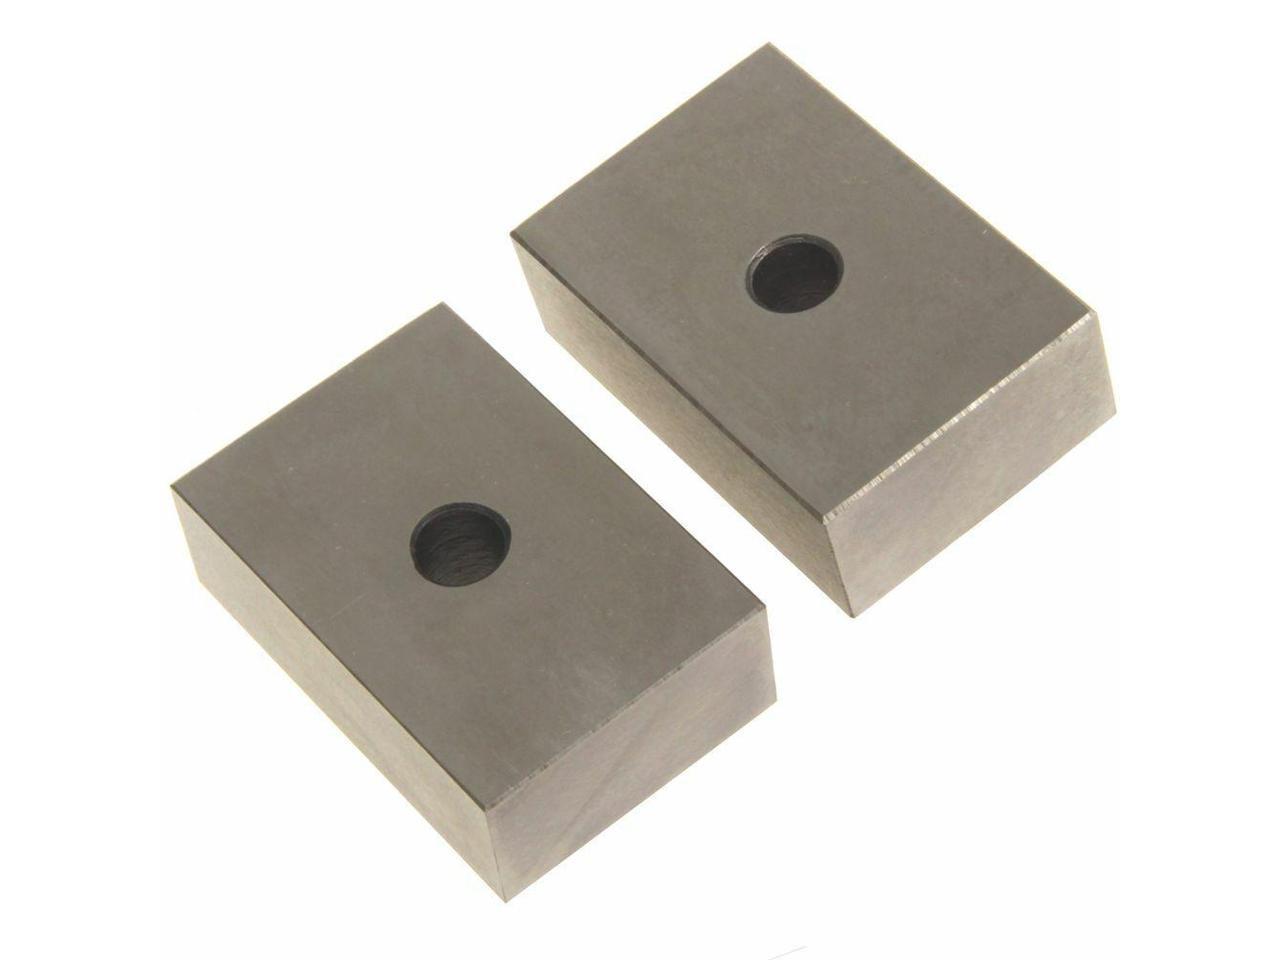 Anytime 1-2-3 Blocks Matched Pair Hardened Steel 23 Holes 1inx2inx3in 123 Set PR for sale online